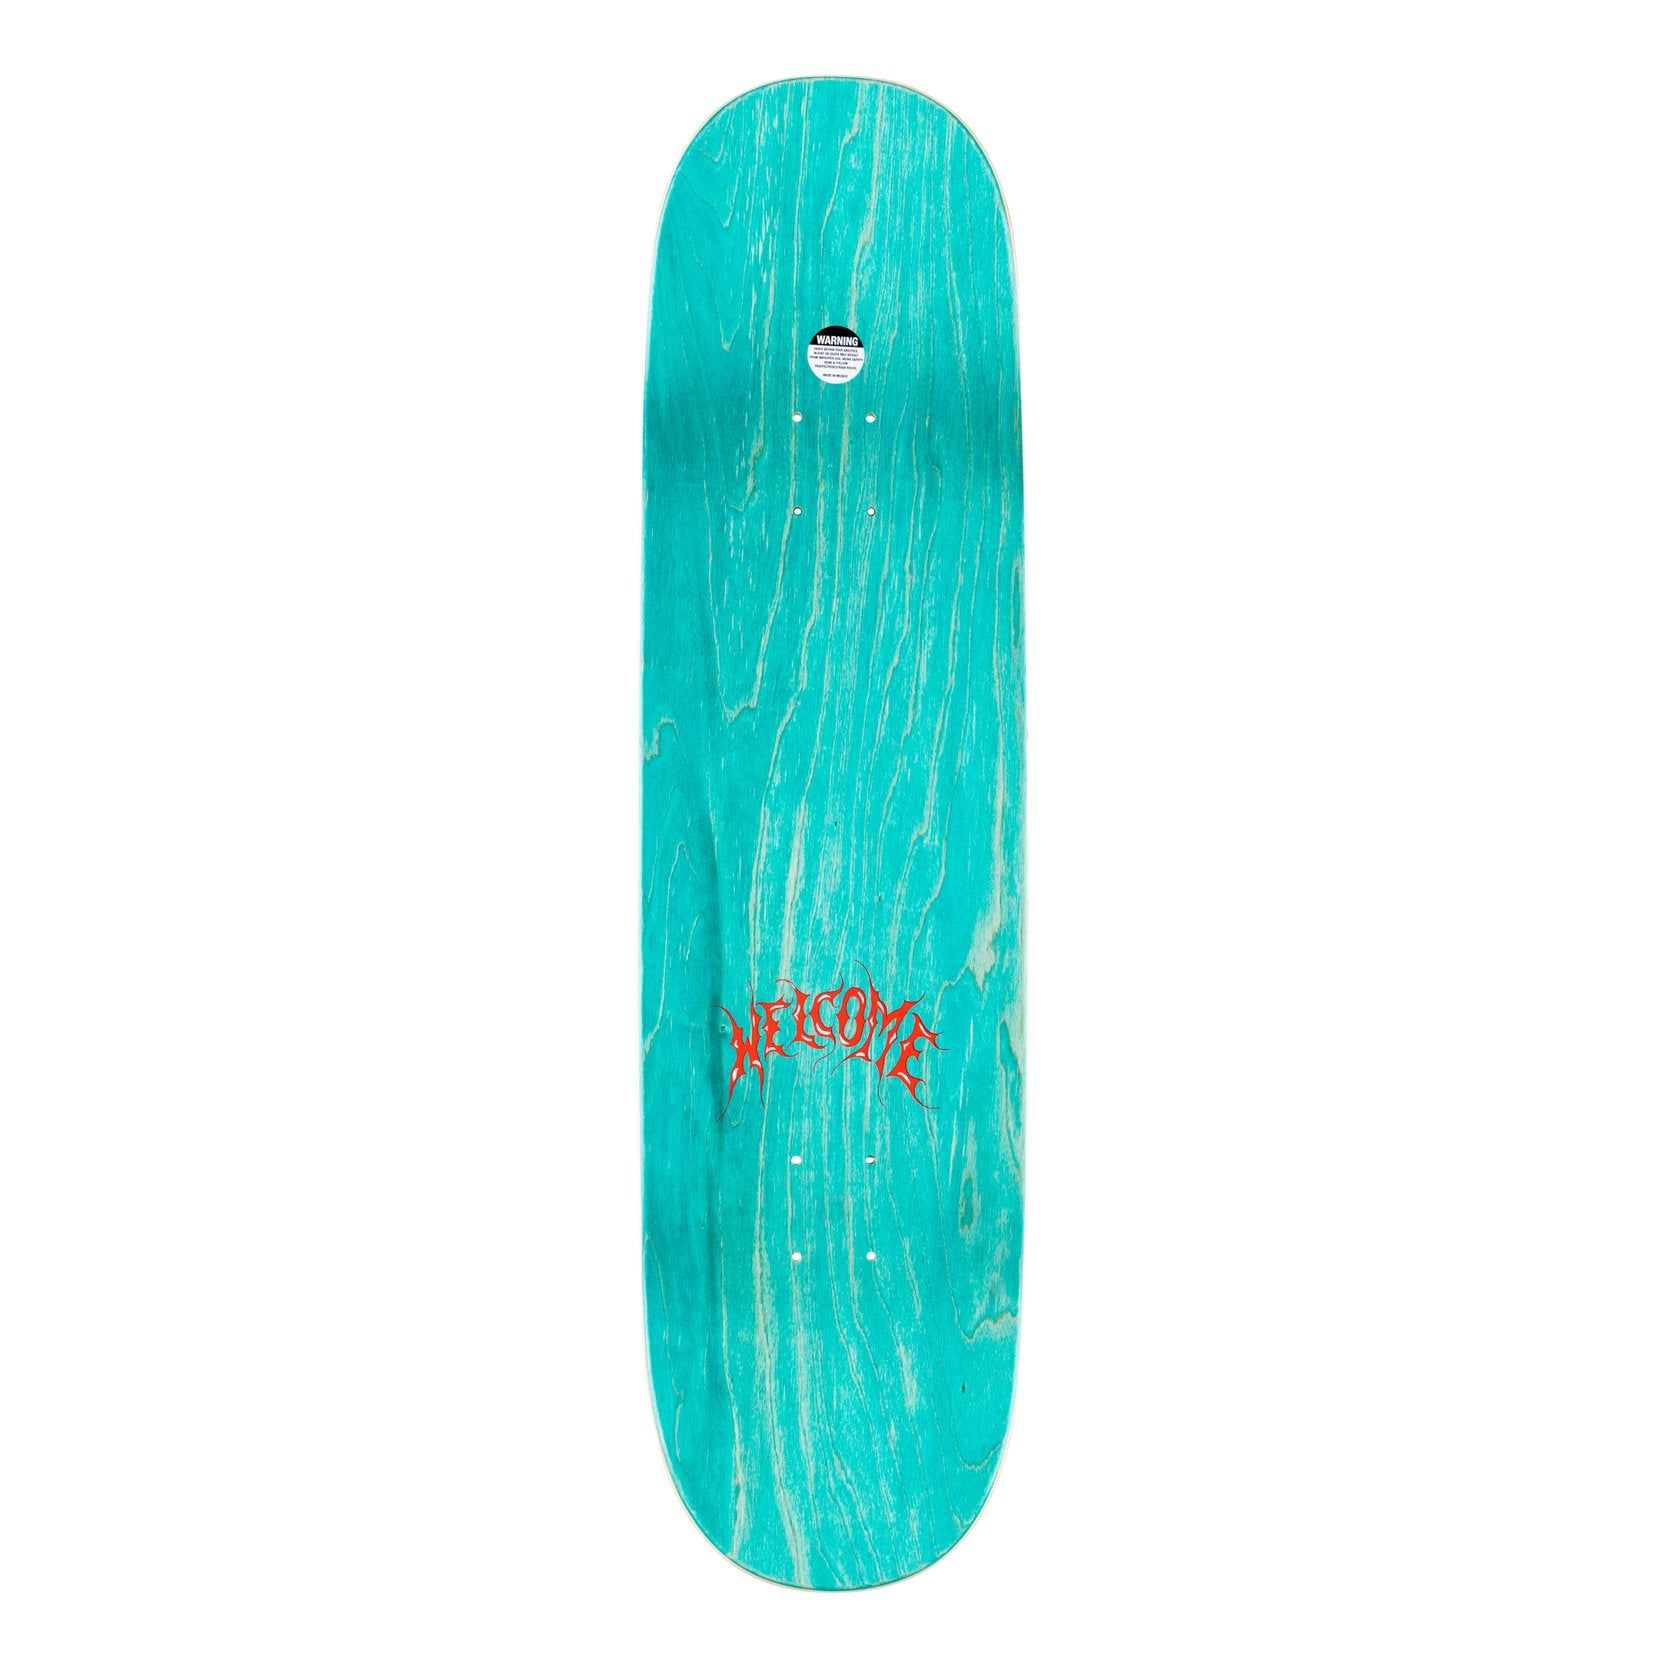 WELCOME DECK - RYAN TOWNLEY ANGEL ON ENENRA TEAL/GOLD FOIL (8.6") - The Drive Skateshop